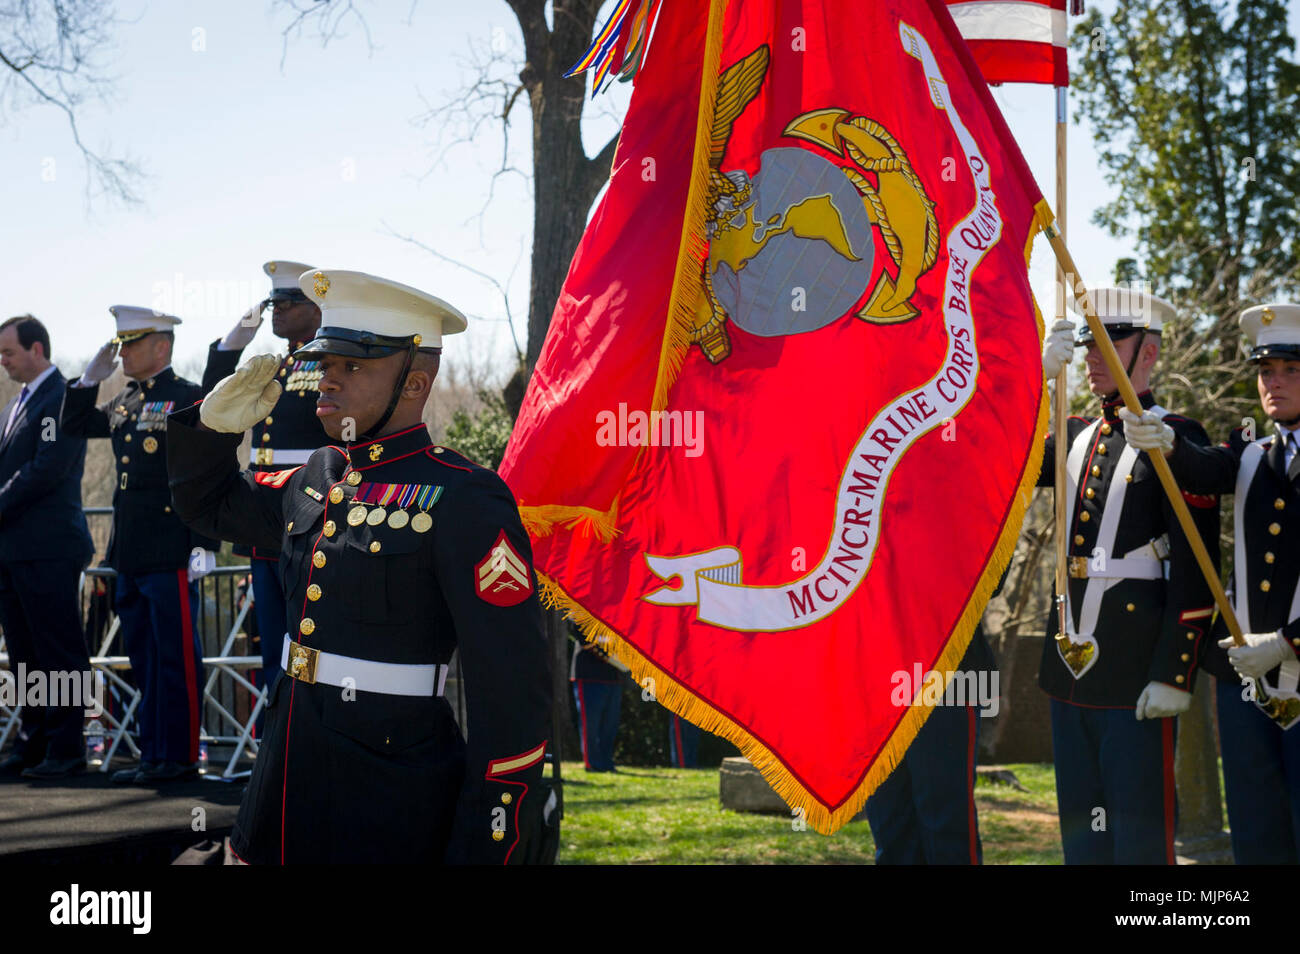 U.S. Marines with Marine Corps Base Quantico salute during the Presidential wreath laying ceremony held at the final resting place of the 4th President of the United States, James Madison, also known as the Father of the Constitution, at his home at Montpelier, Orange, Va., March 16, 2018. This event was held in commemoration of the 267th anniversary of the birth of Madison, born in 1751, and has also been decreed as James Madison Appreciation Day for the Commonwealth of Virginia. Armed Forces and civilians displaying courage bravery dedication commitment and sacrifice Stock Photo